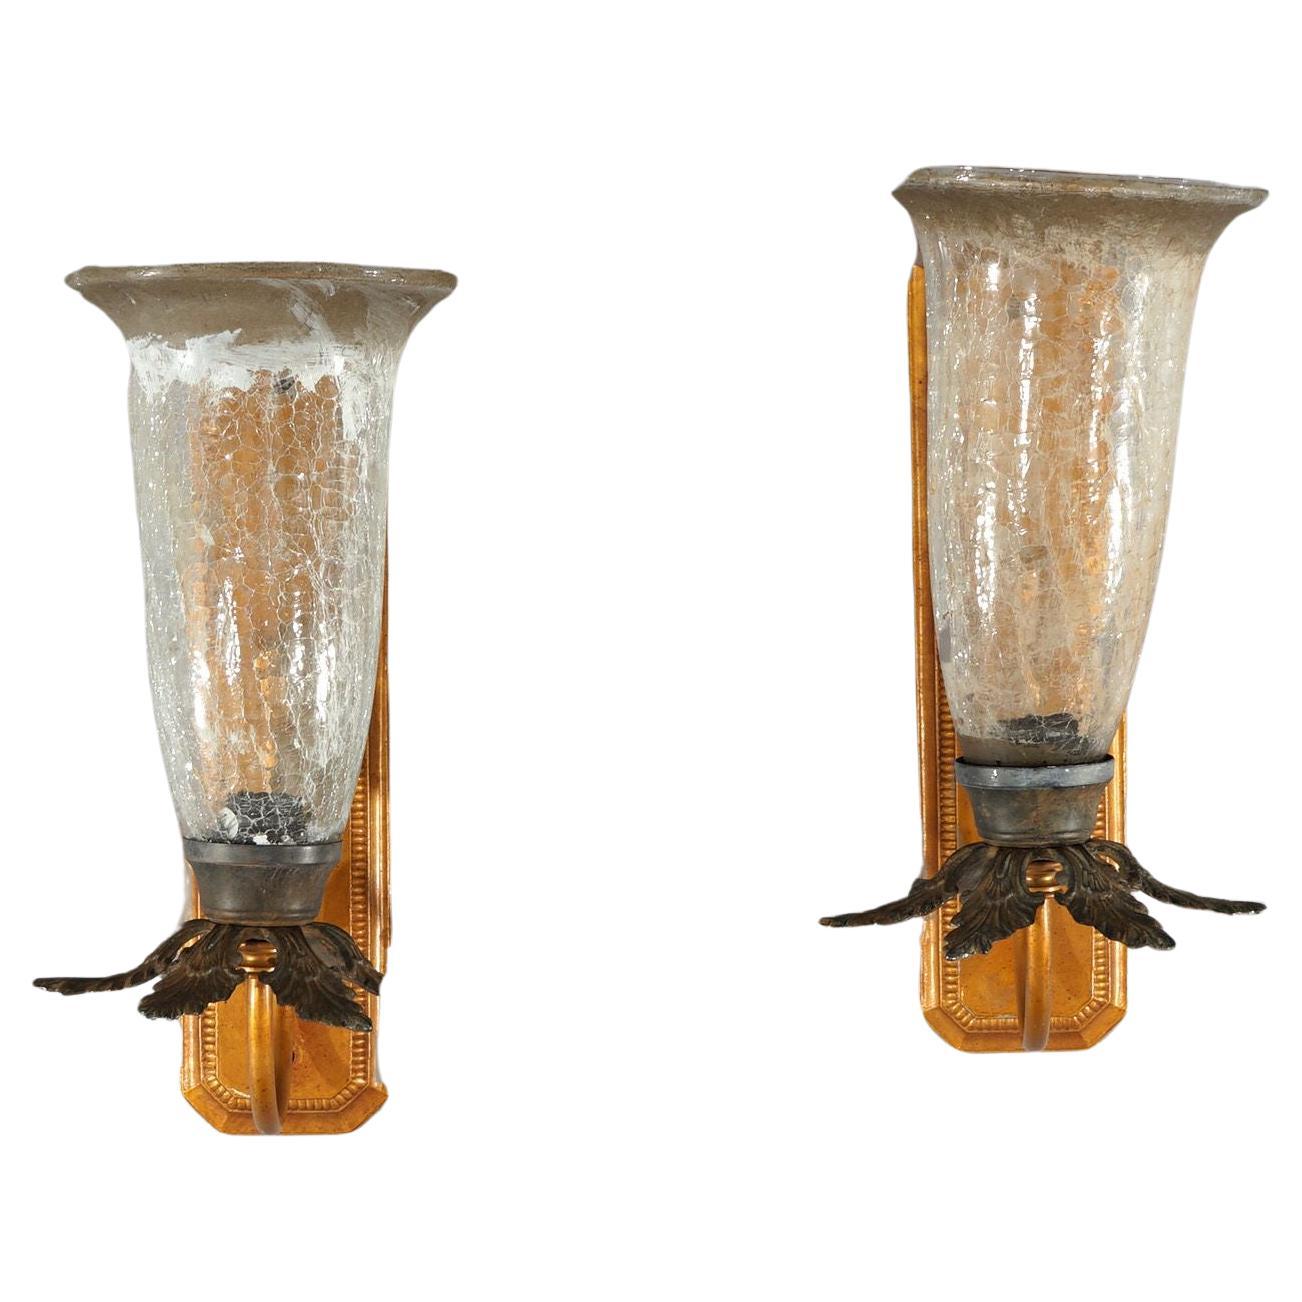 Pair Mid-Century Modern French Style Fleur-de-lis Crackled Glass Wall Sconces